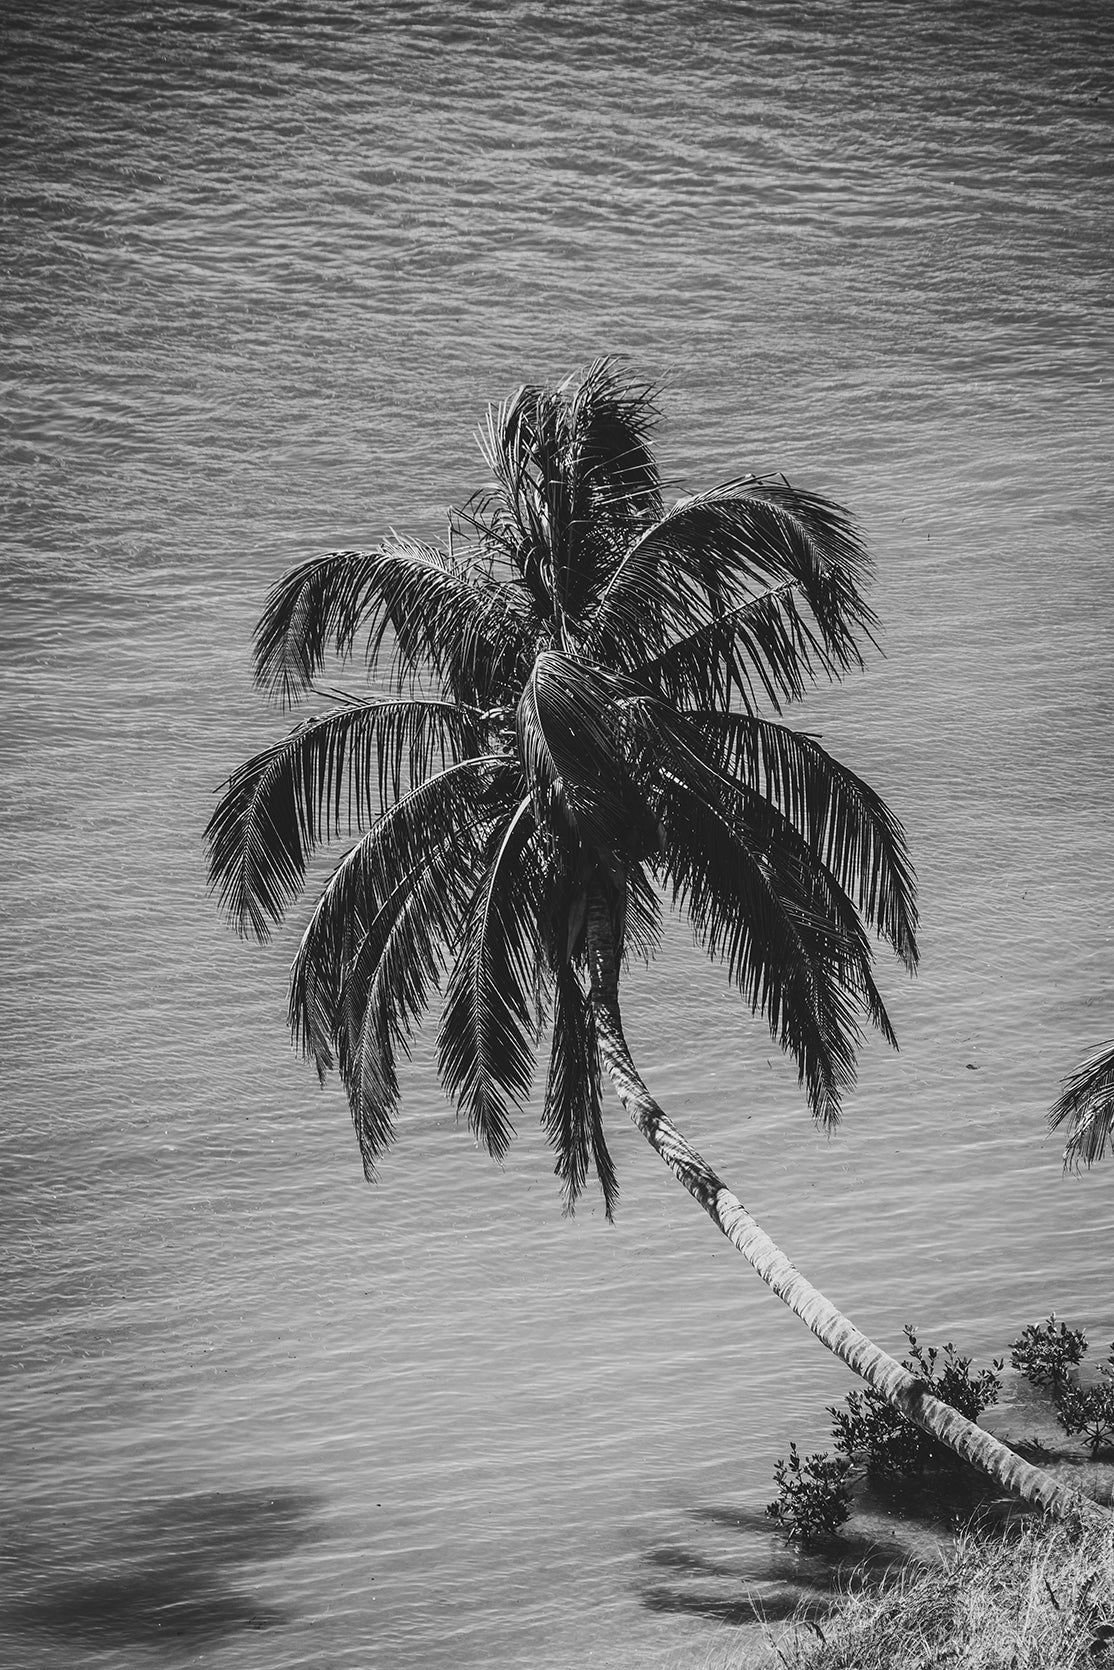 Palm Over Water Black and White Botanical Nature Photo DIY Wall Decor Instant Download Print - Printable  - PIPAFINEART